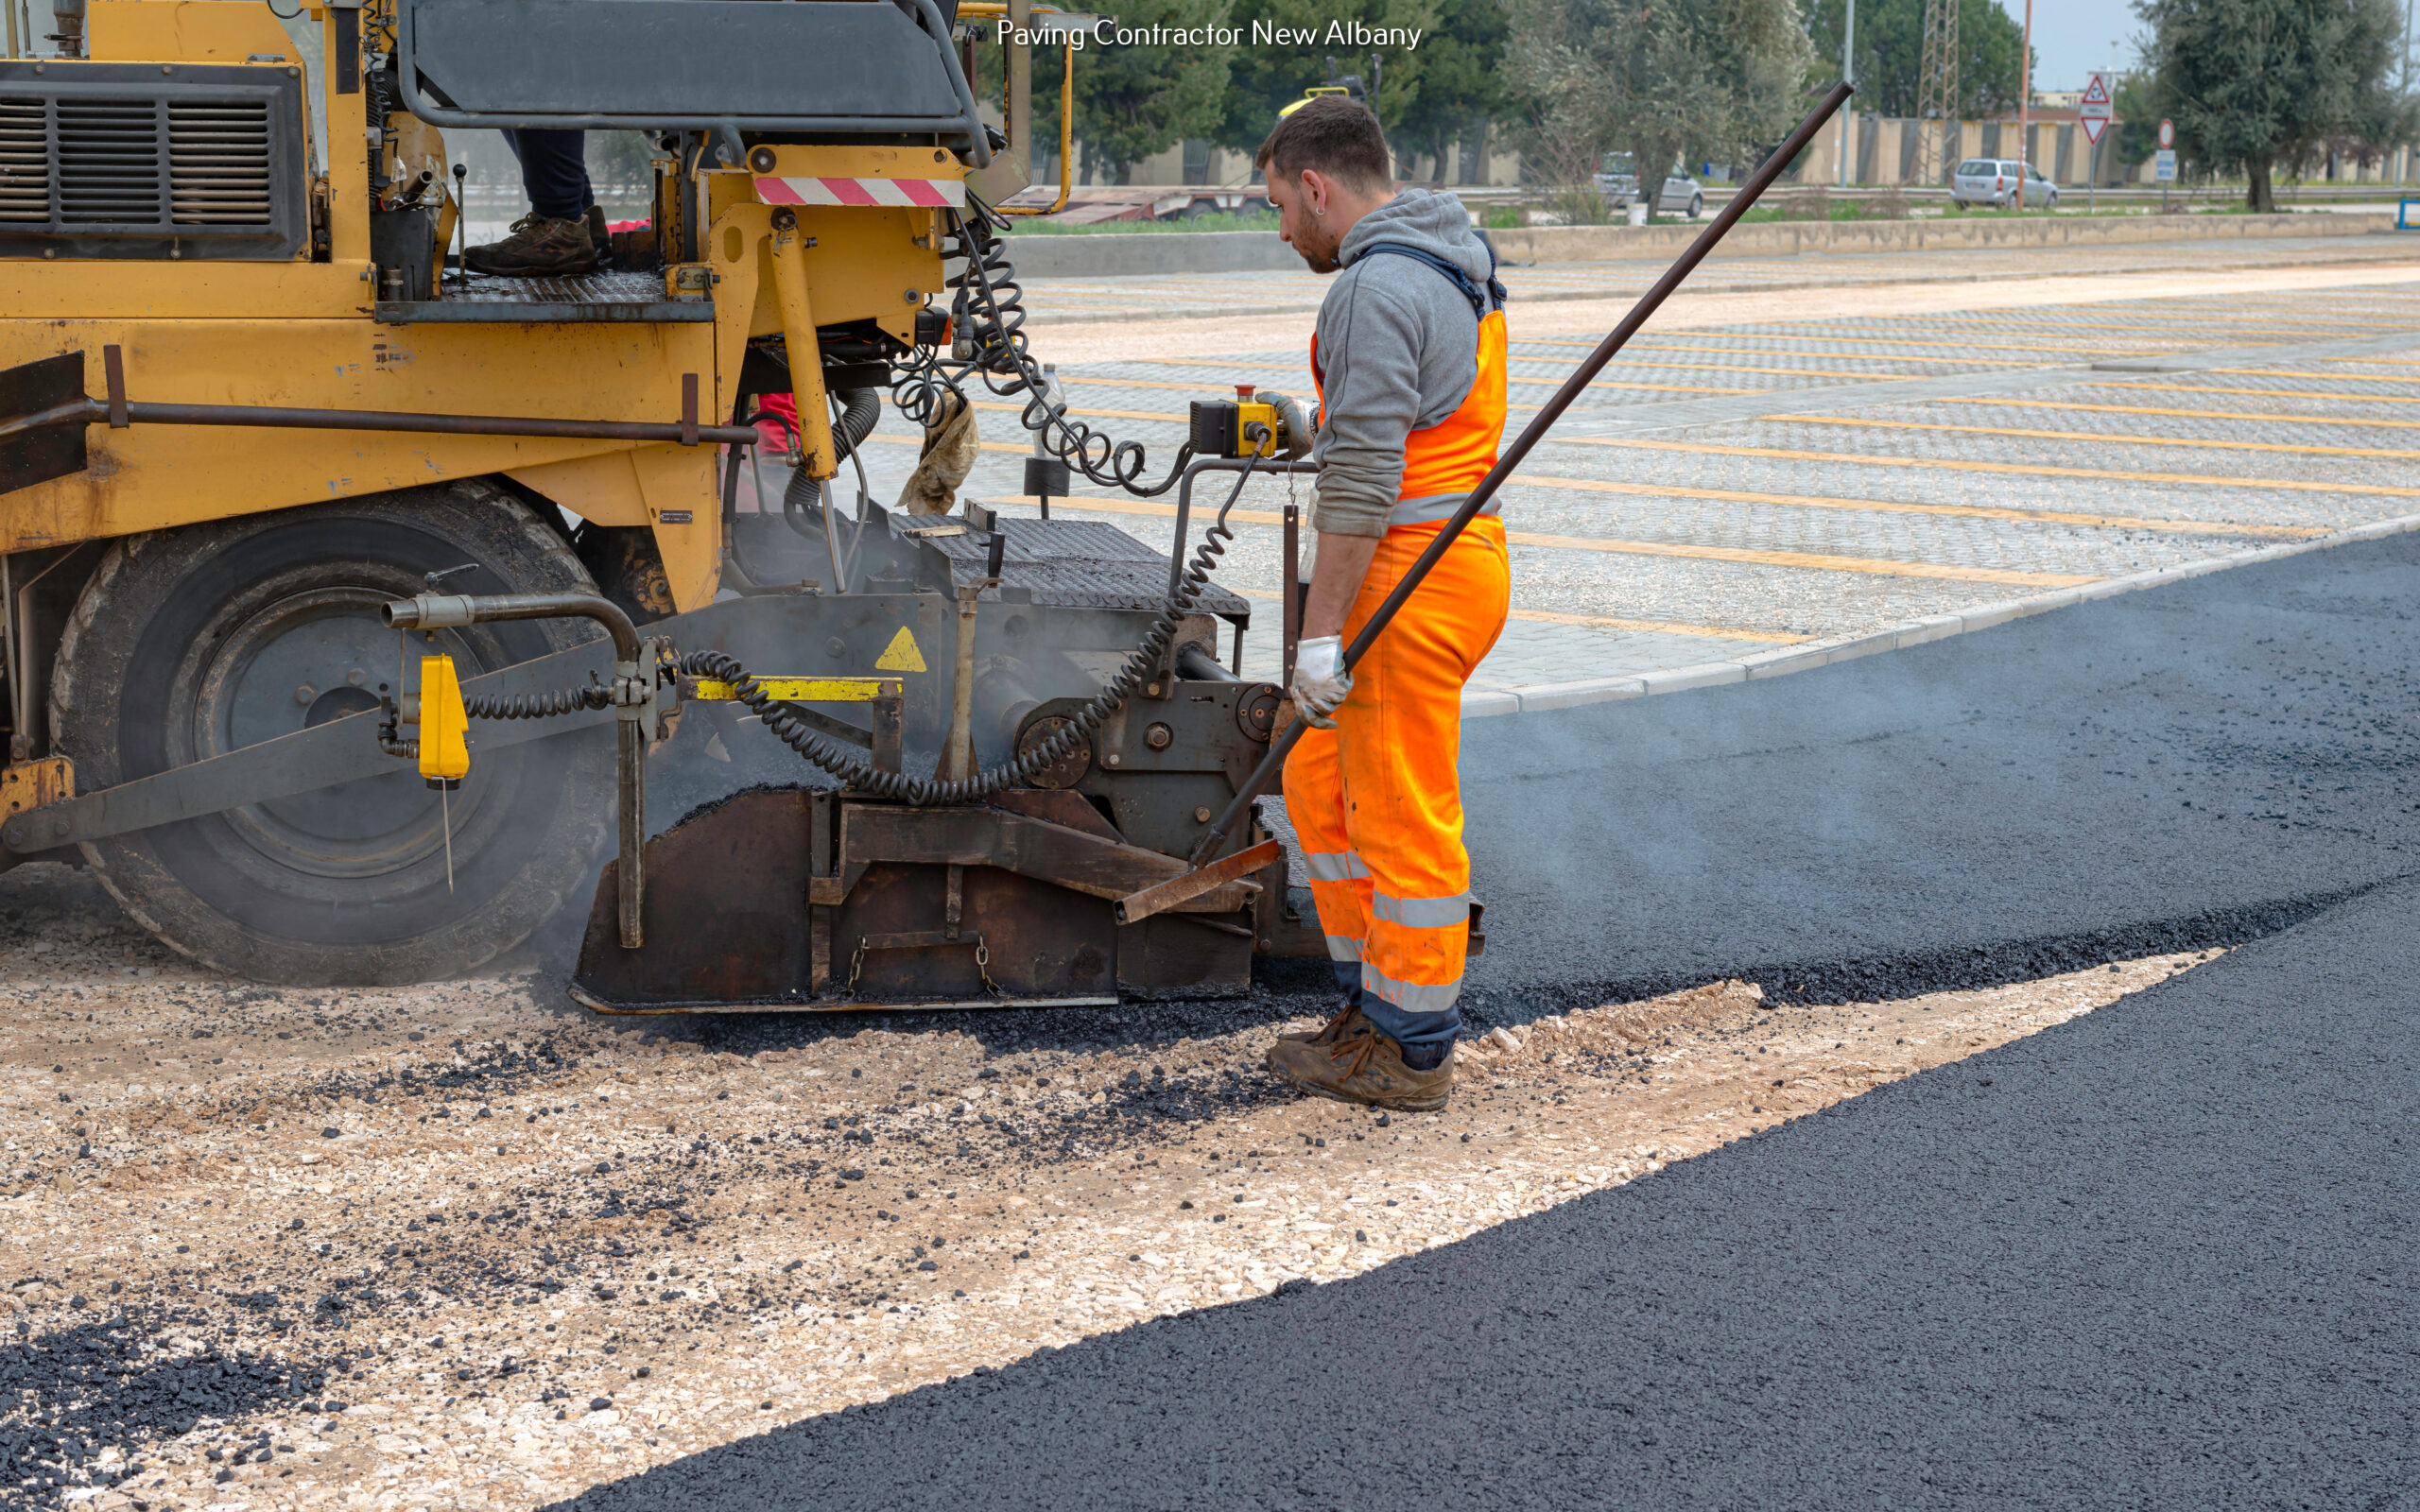 Southern Indian Asphalt Paving Guides Property Owners in Choosing a Paving Contractor 1